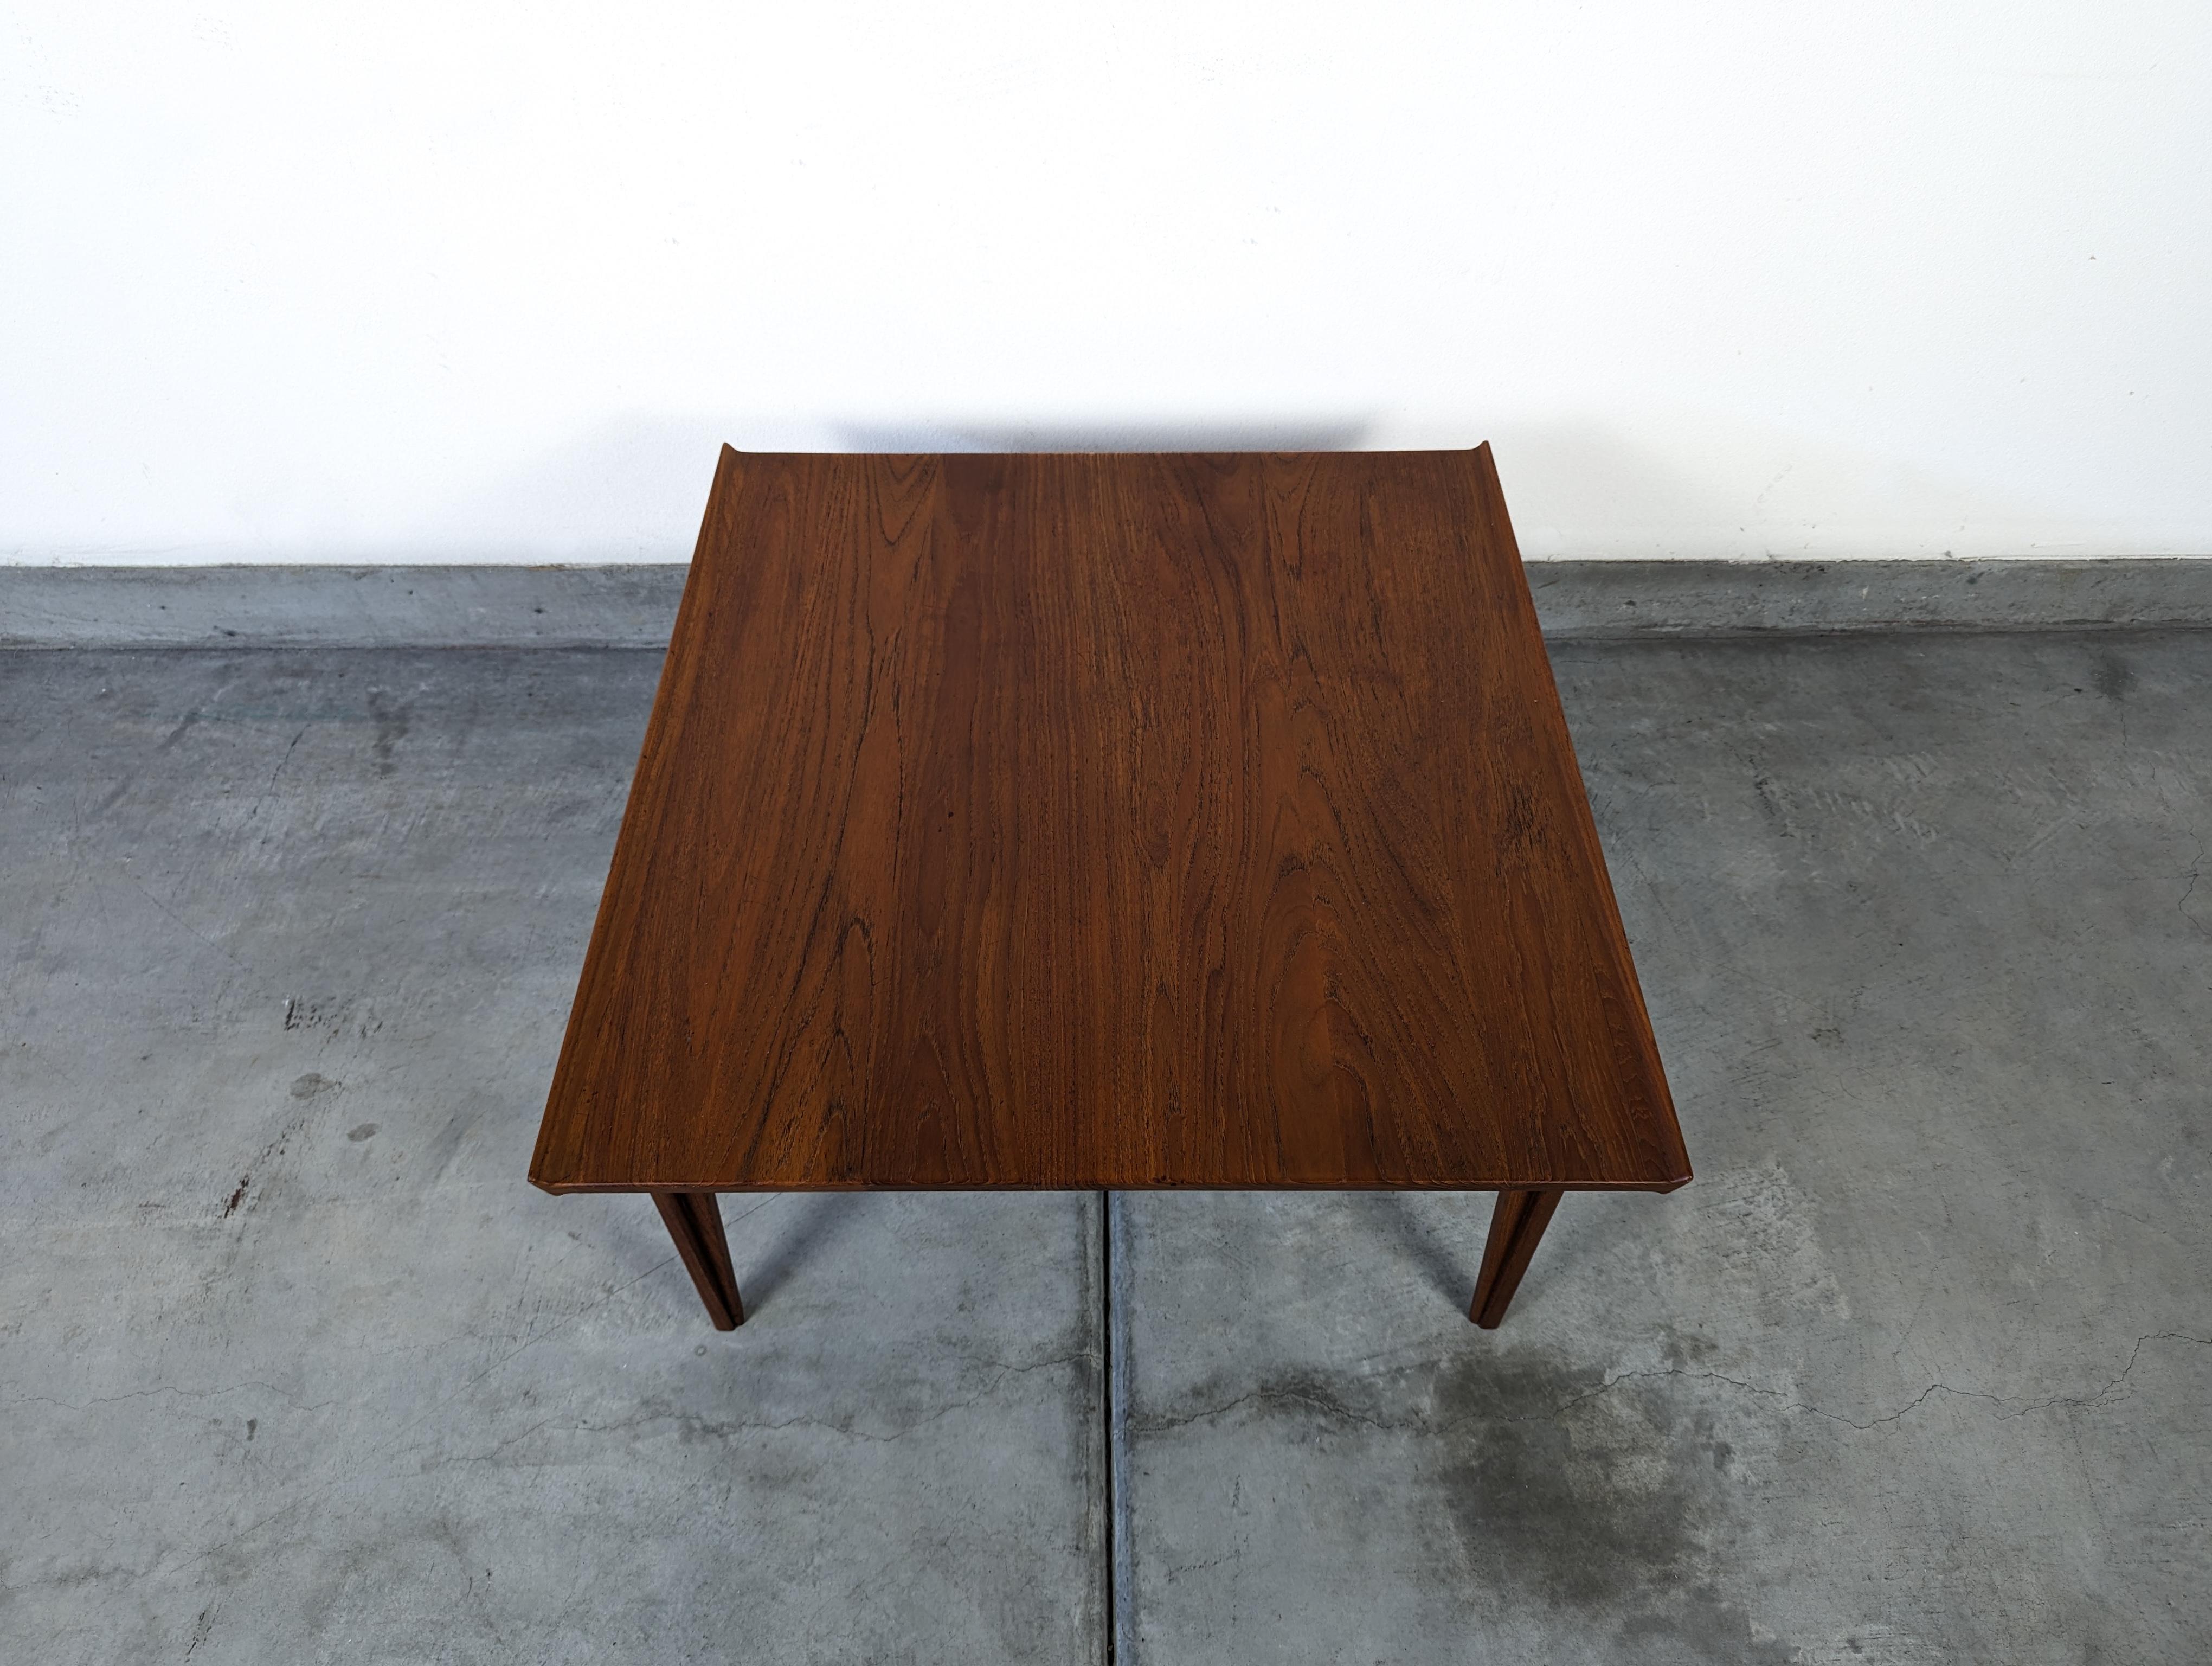 Embrace the timeless elegance and masterful craftsmanship of Danish Modern design with this authentic mid-century modern teak coffee table, designed by the acclaimed Finn Juhl for the renowned manufacturer France and Son in the 1950s. Finn Juhl, a